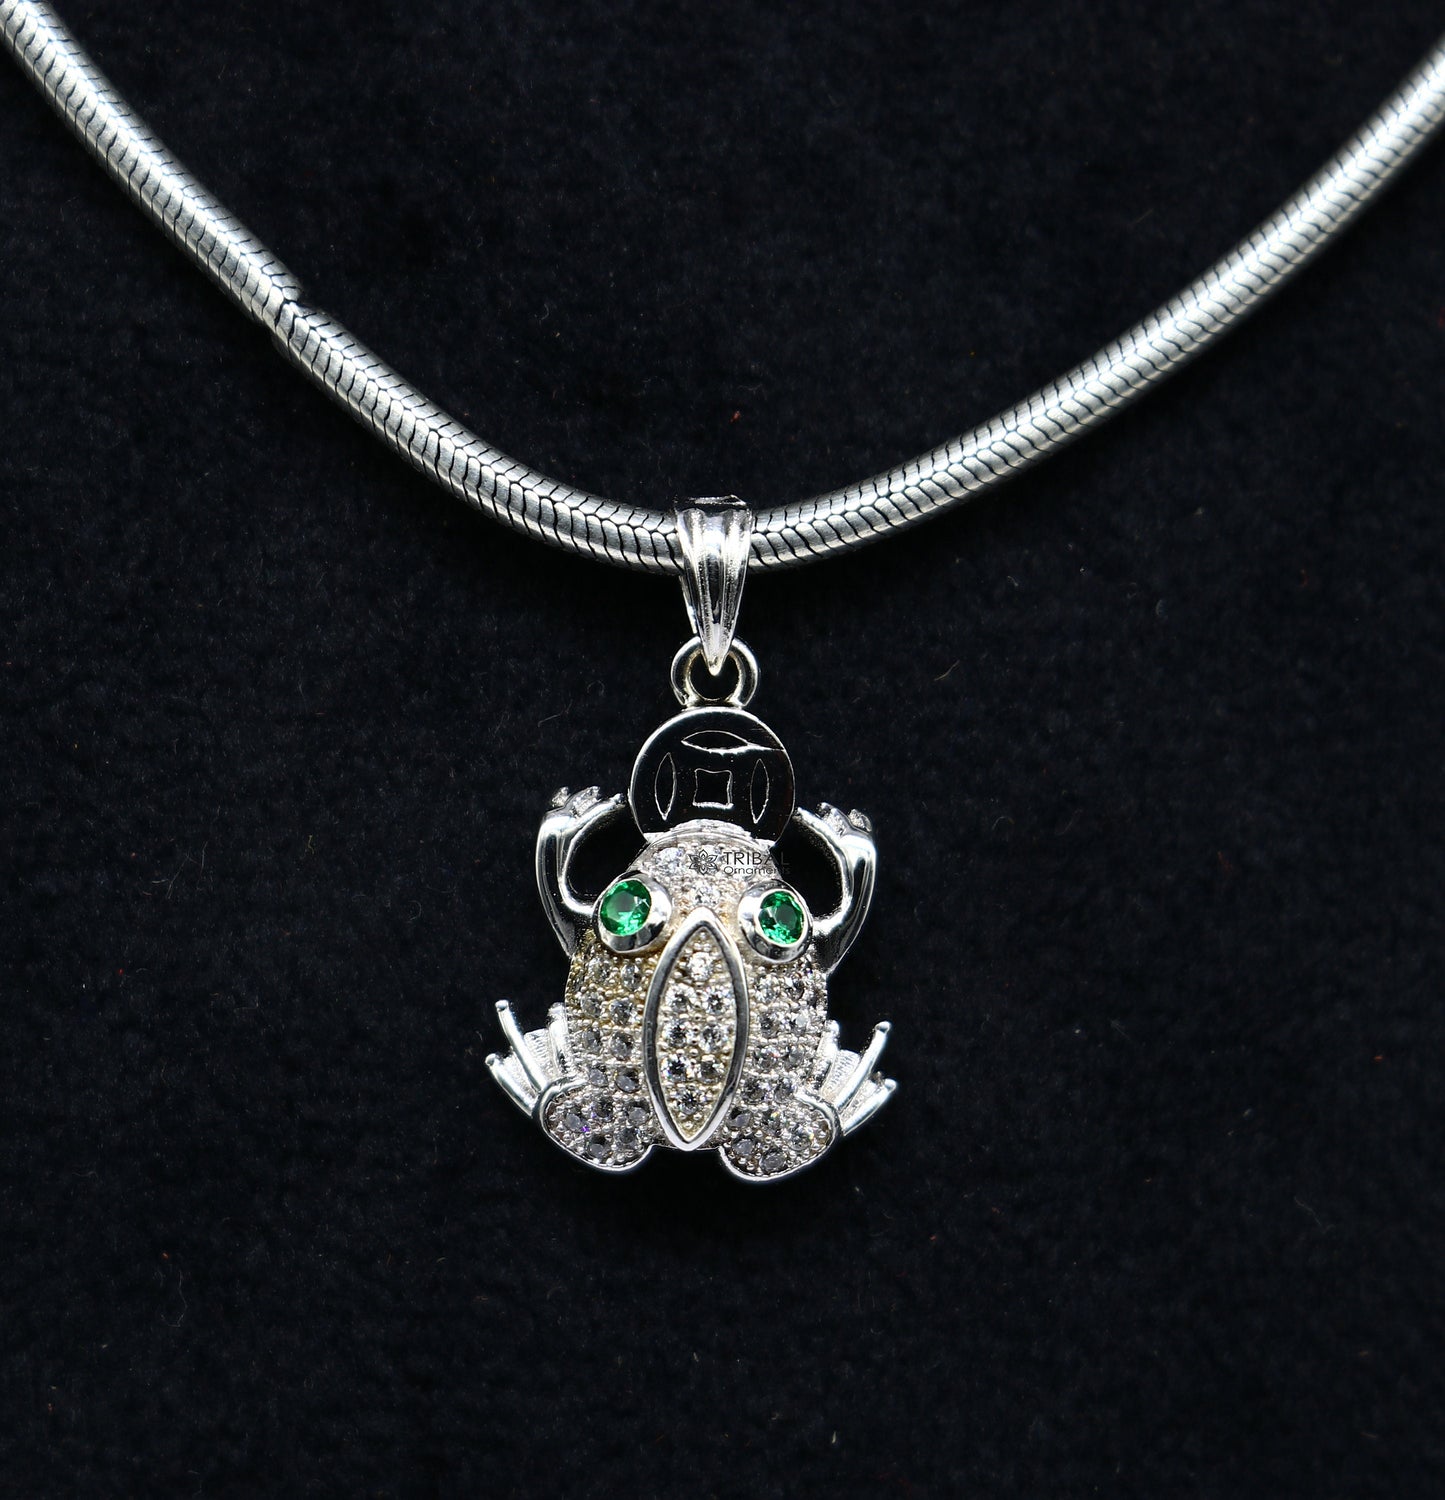 925 sterling silver beautiful cubic zircon stone frog pendant  adding a touch of natural beauty and sophistication to any outfit nsp632 - TRIBAL ORNAMENTS